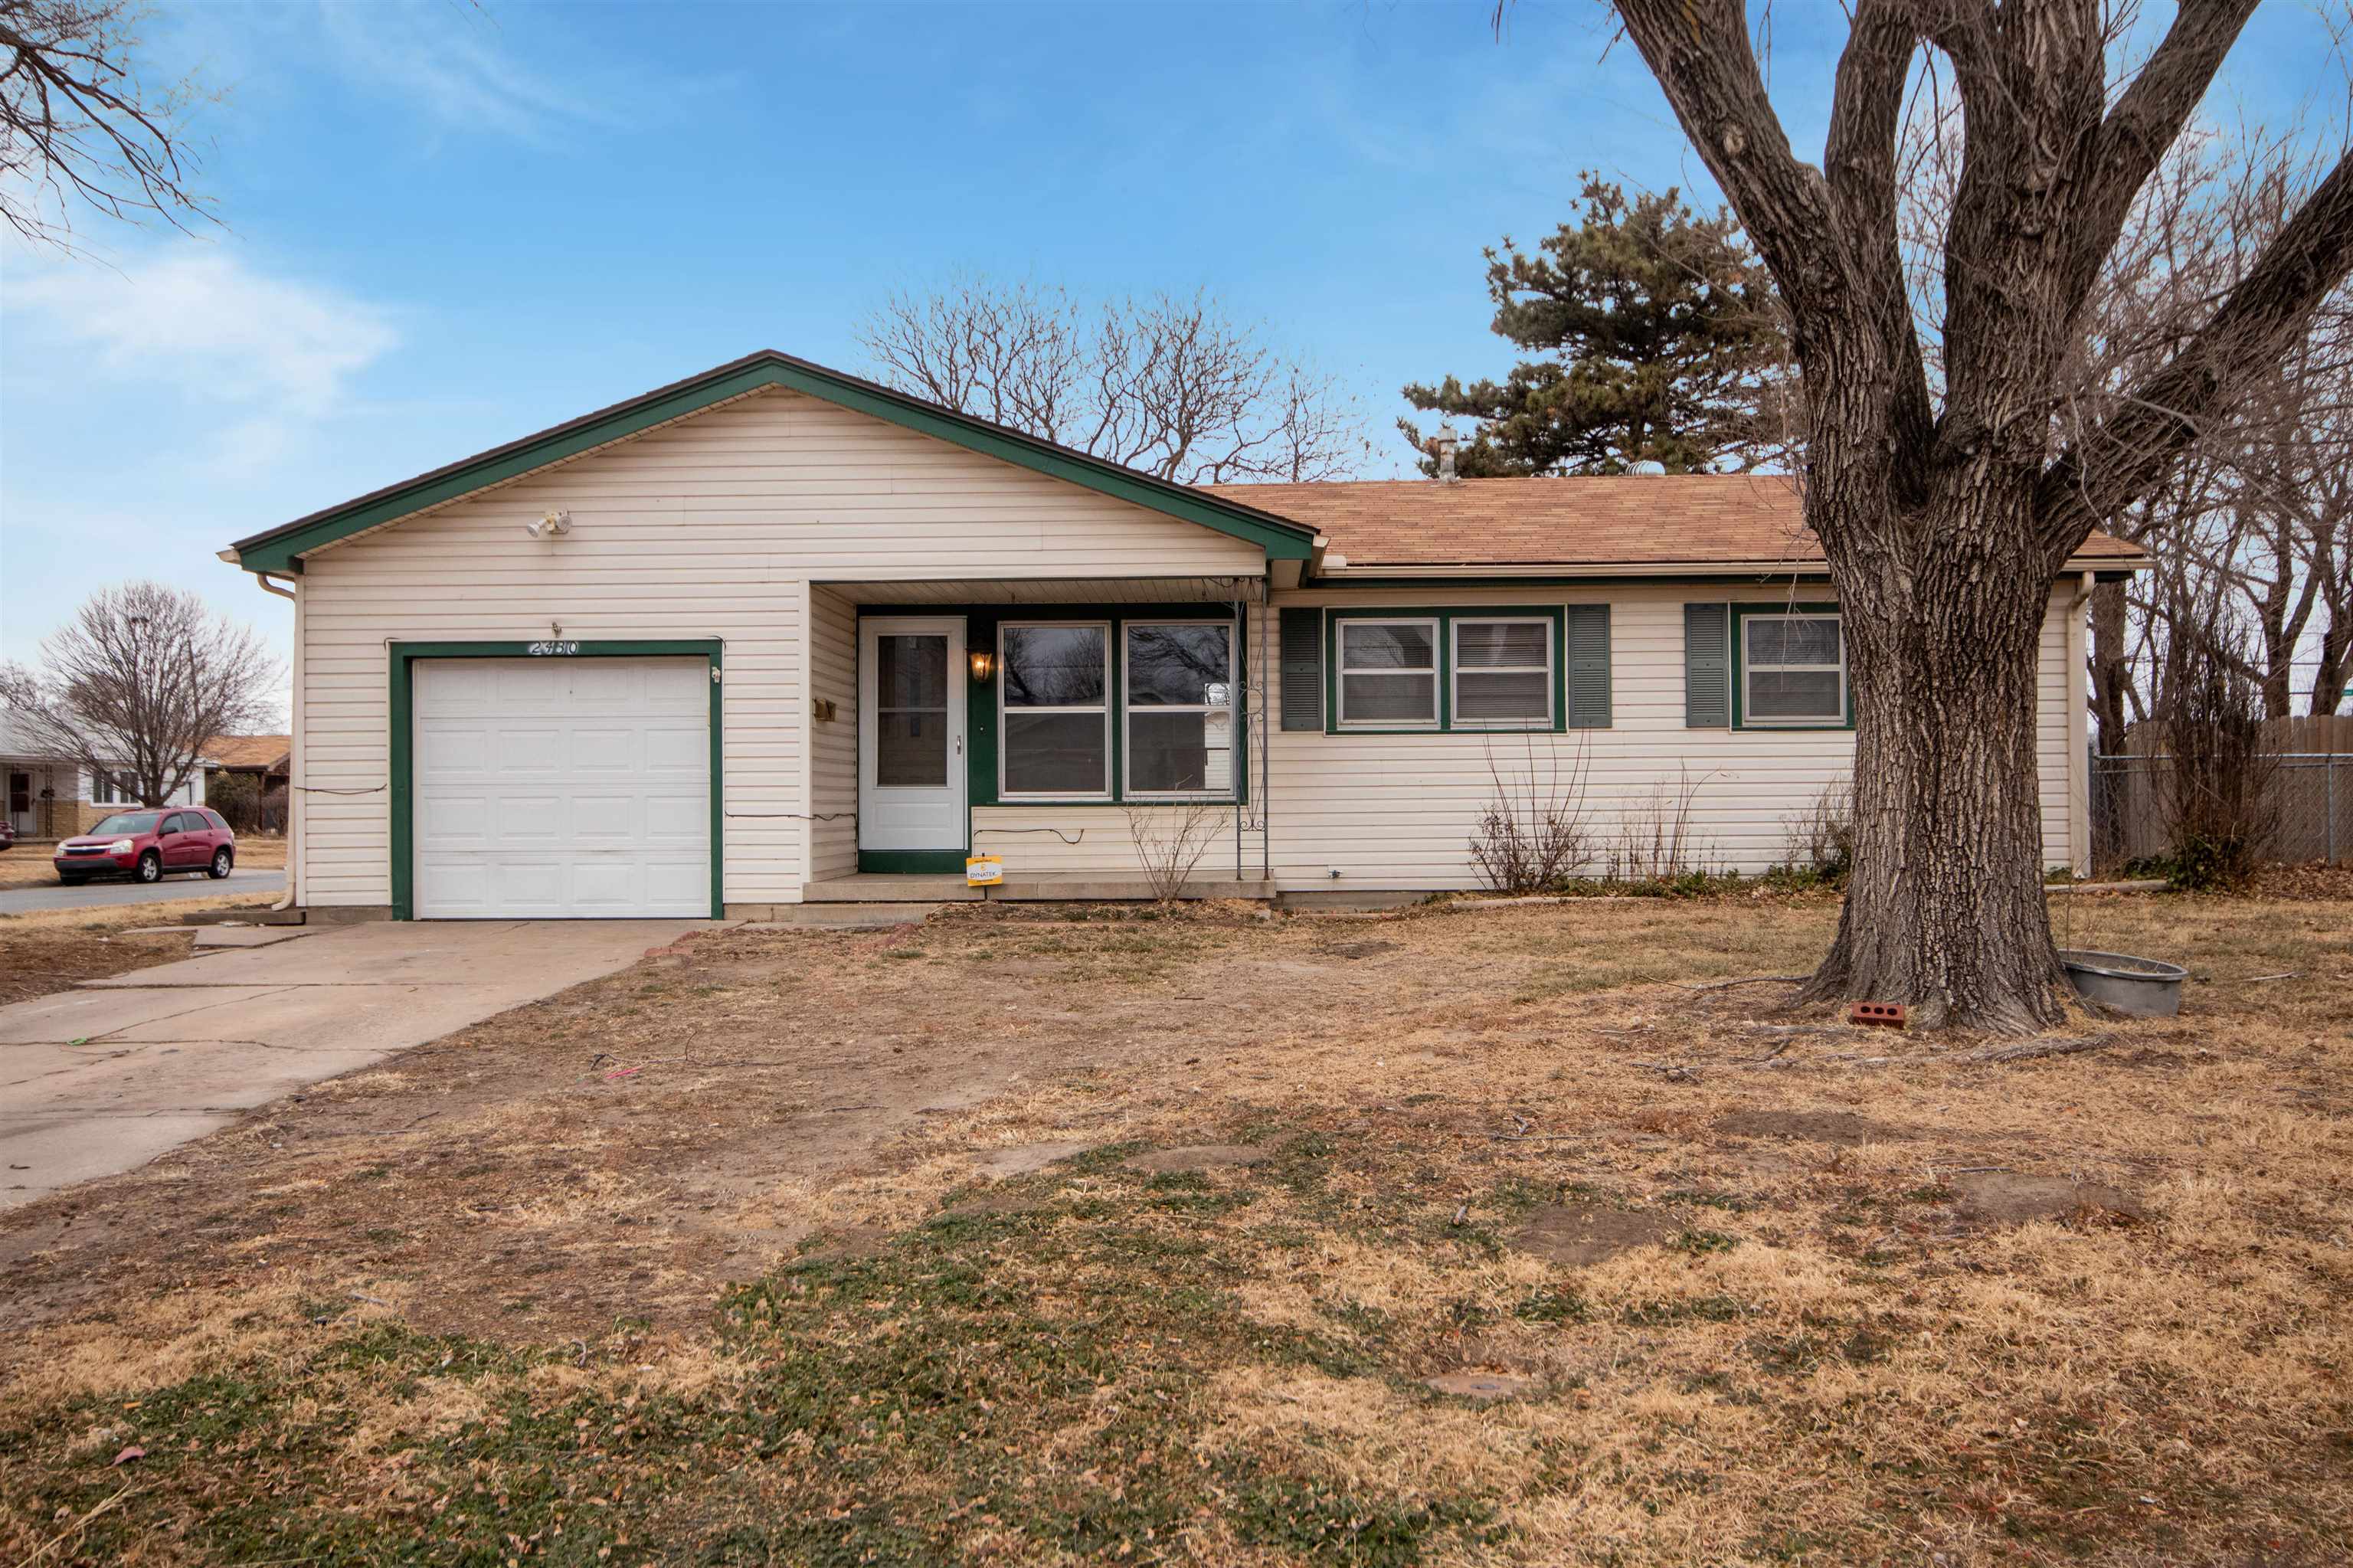 Come see this cute 3 bedroom 1 bath home on a corner lot! The inside is newly painted and the kitche